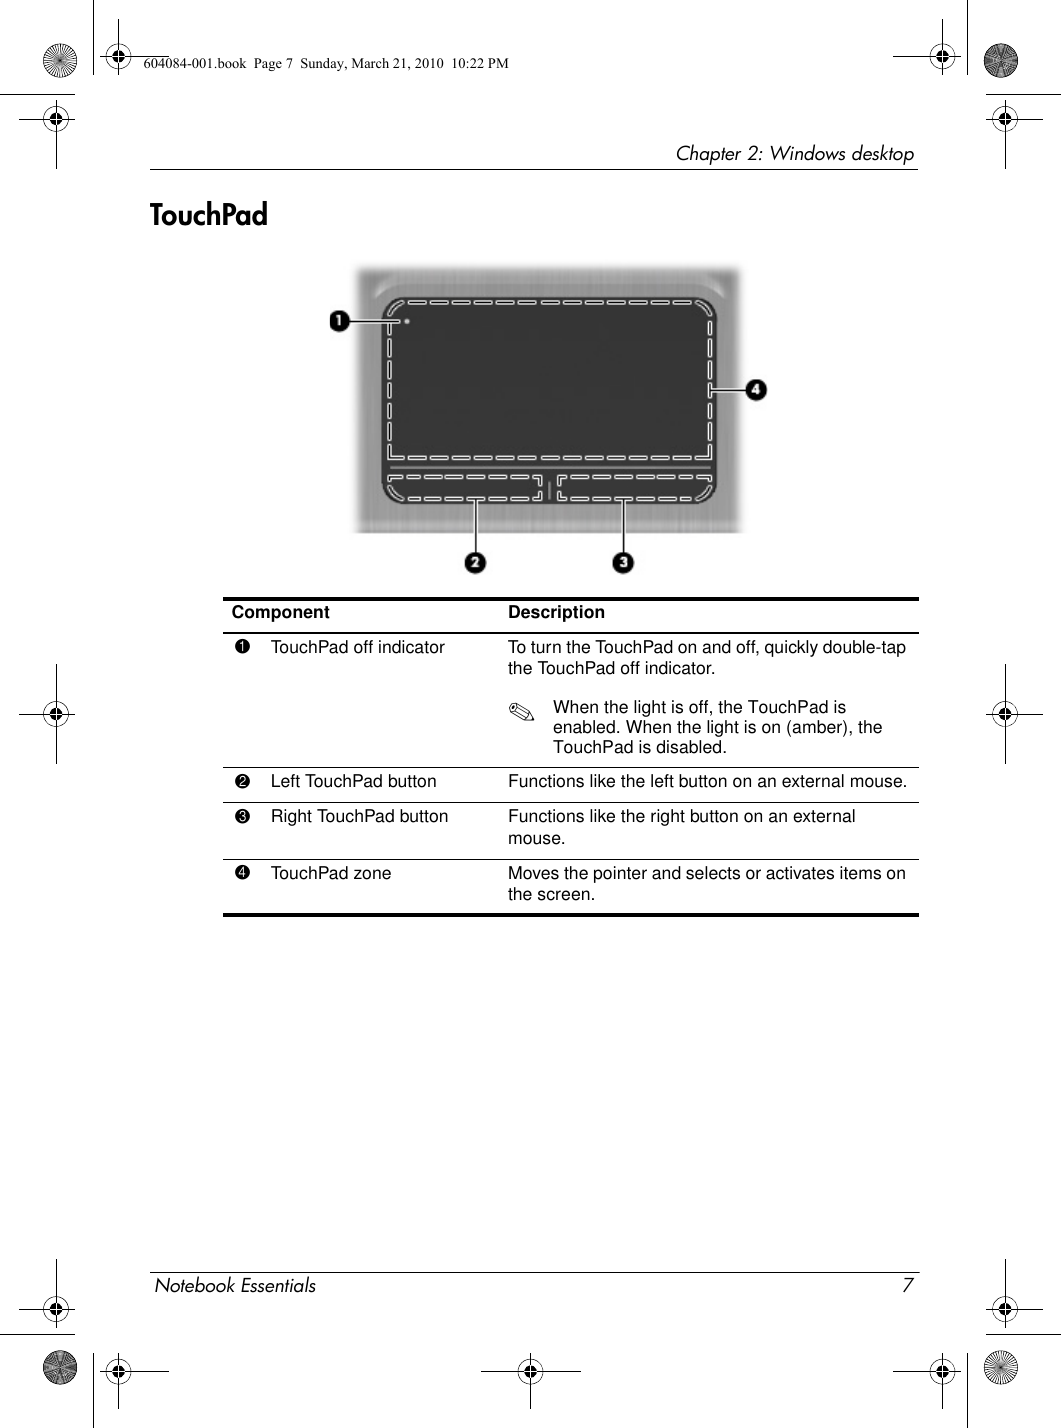 Notebook Essentials 7Chapter 2: Windows desktopTouchPad Component Description1TouchPad off indicator To turn the TouchPad on and off, quickly double-tap the TouchPad off indicator.✎When the light is off, the TouchPad is enabled. When the light is on (amber), the TouchPad is disabled.2Left TouchPad button Functions like the left button on an external mouse.3Right TouchPad button Functions like the right button on an external mouse.4TouchPad zone Moves the pointer and selects or activates items on the screen.604084-001.book  Page 7  Sunday, March 21, 2010  10:22 PM